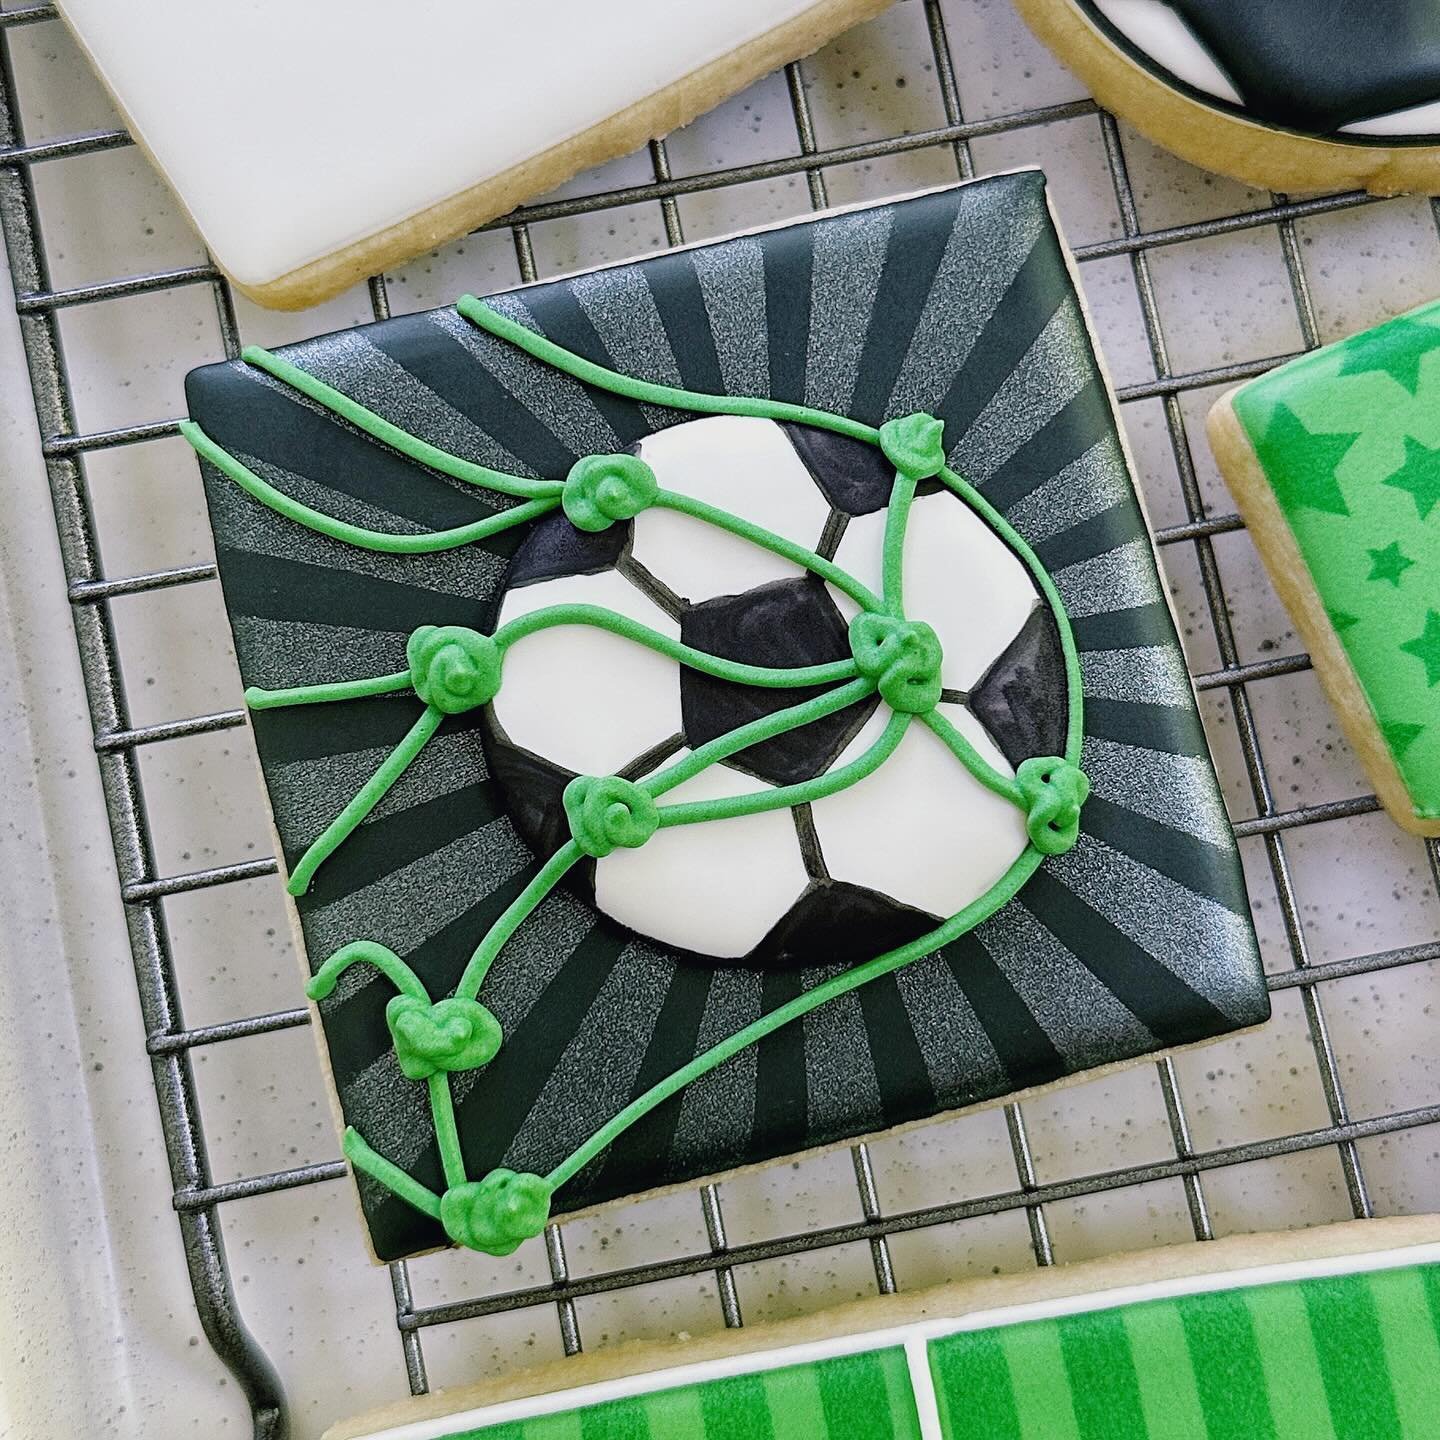 Soccer shots - closeups. ⚽️
This was a fun set to make. I always like the high contrast colors and a pop of green.

#atlantacookies #customcookiesatlanta #atlantacookier #atlantacustomcookies #atlcookies  #cookiesatl #customcookies #decoratedcookies 